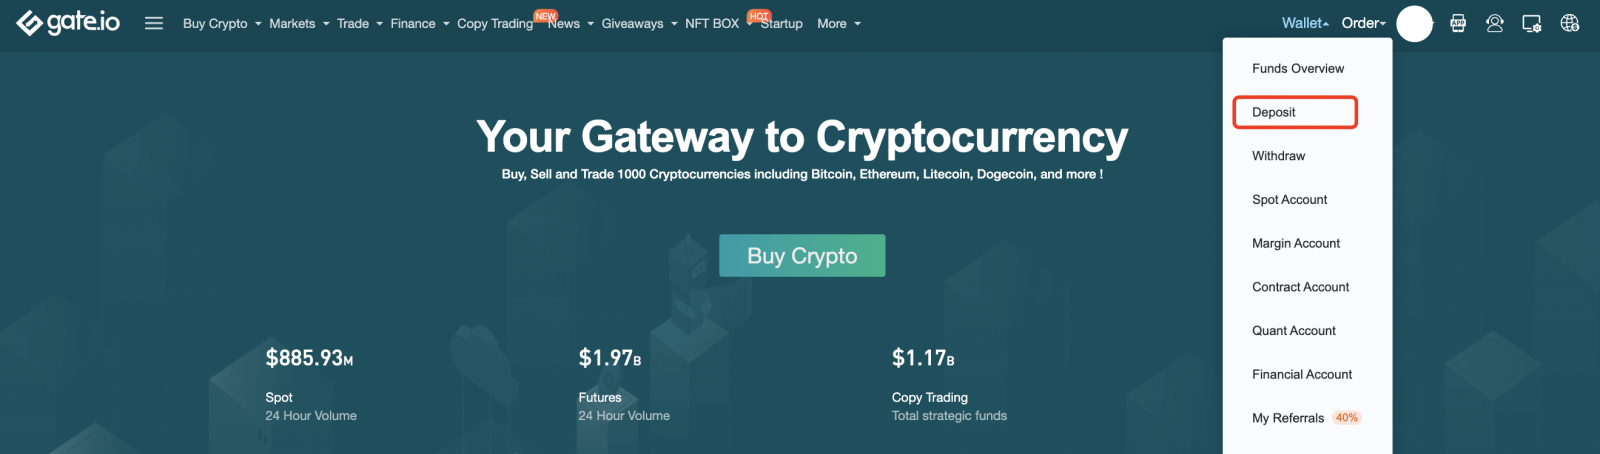 How to Withdraw and make a Deposit in Gate.io